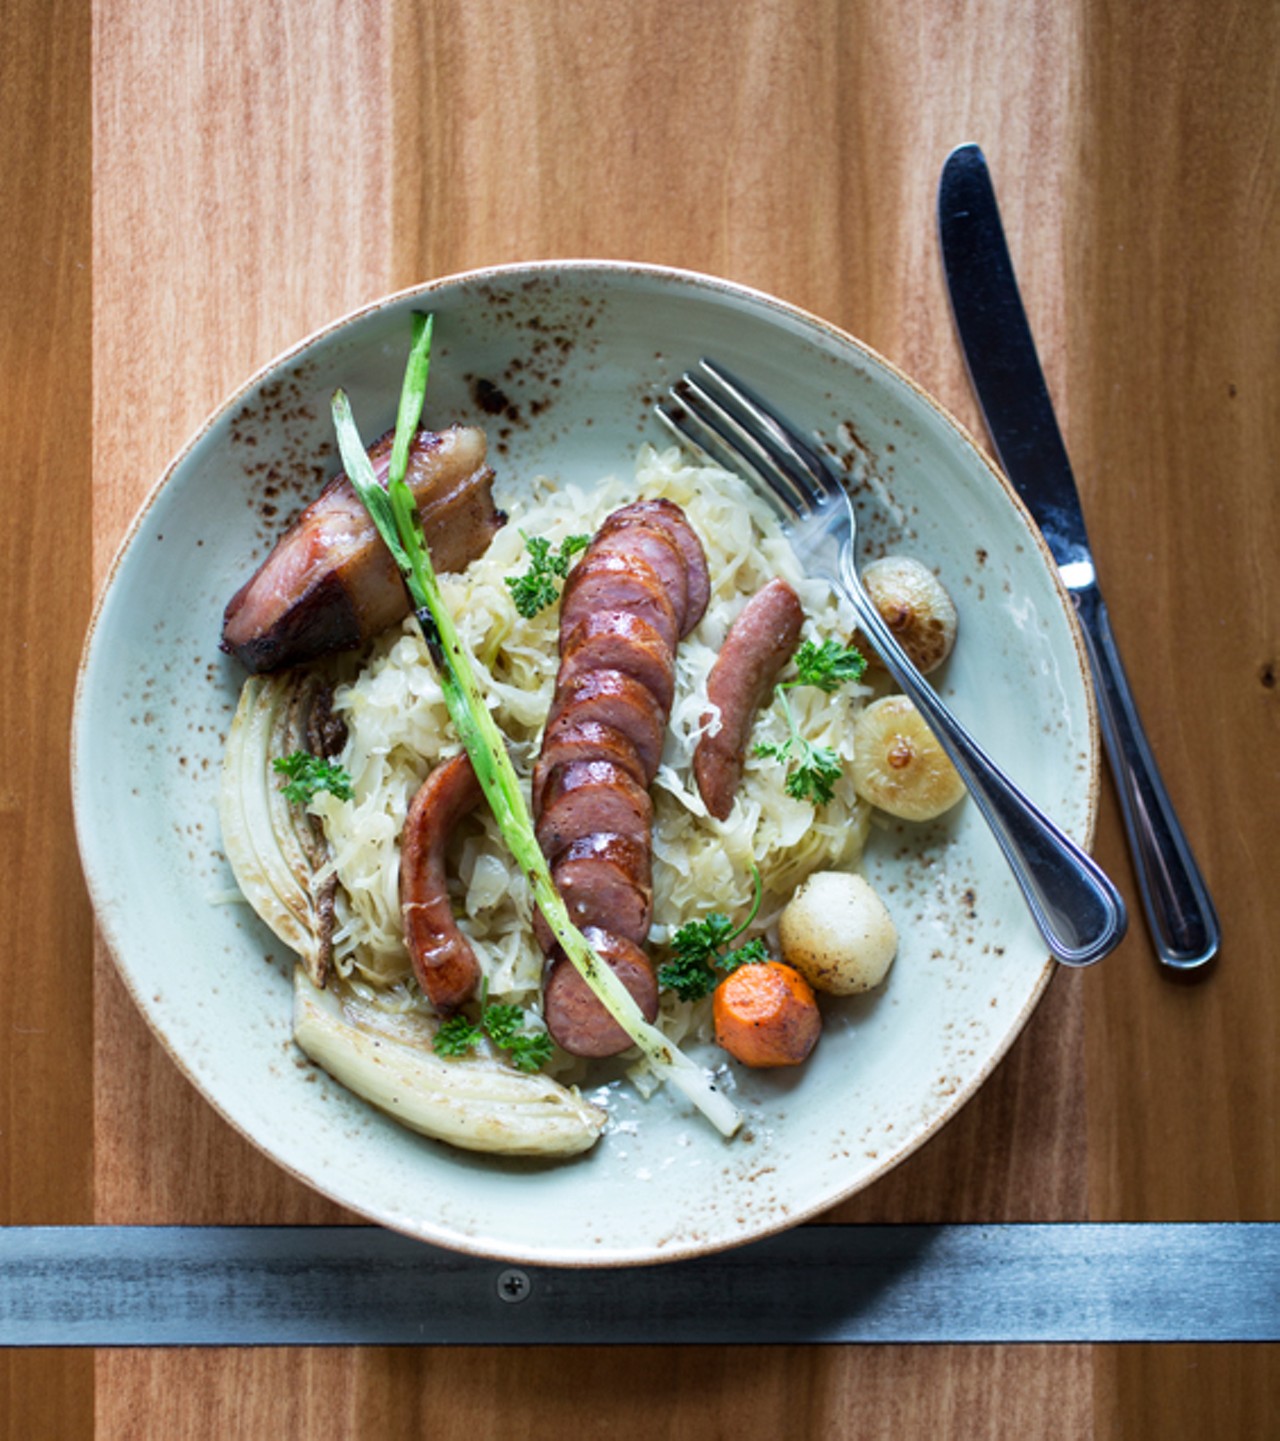 Choucroute Garnie: house sausages and smoked pork.